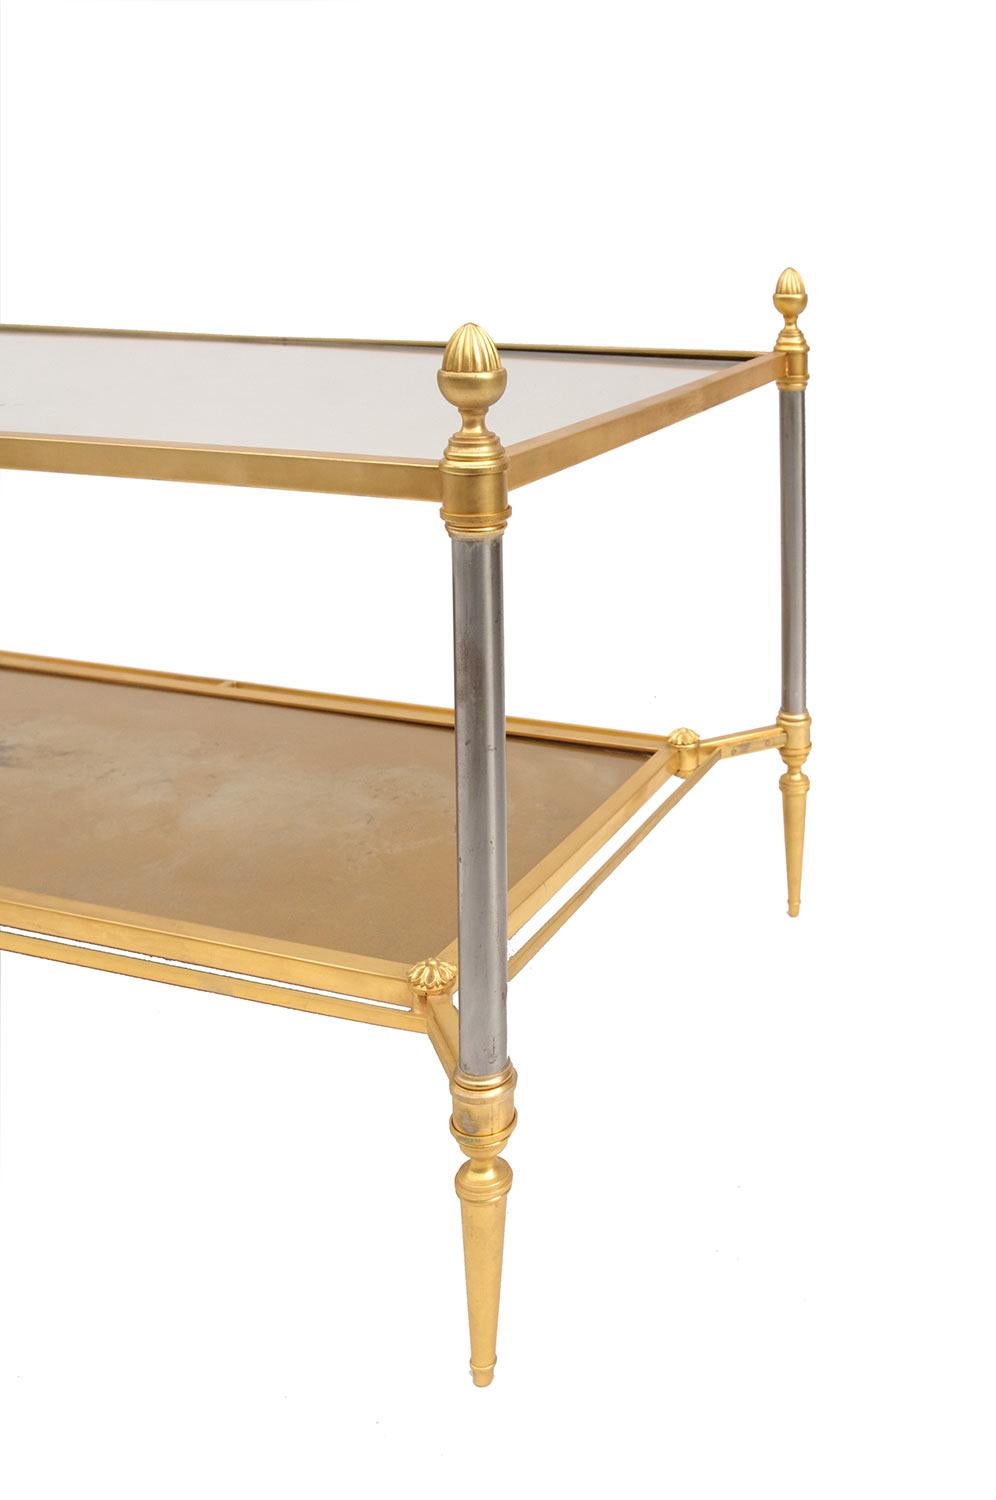 French Maison Jansen Gilt Brass and Glass Coffee Table from 1960